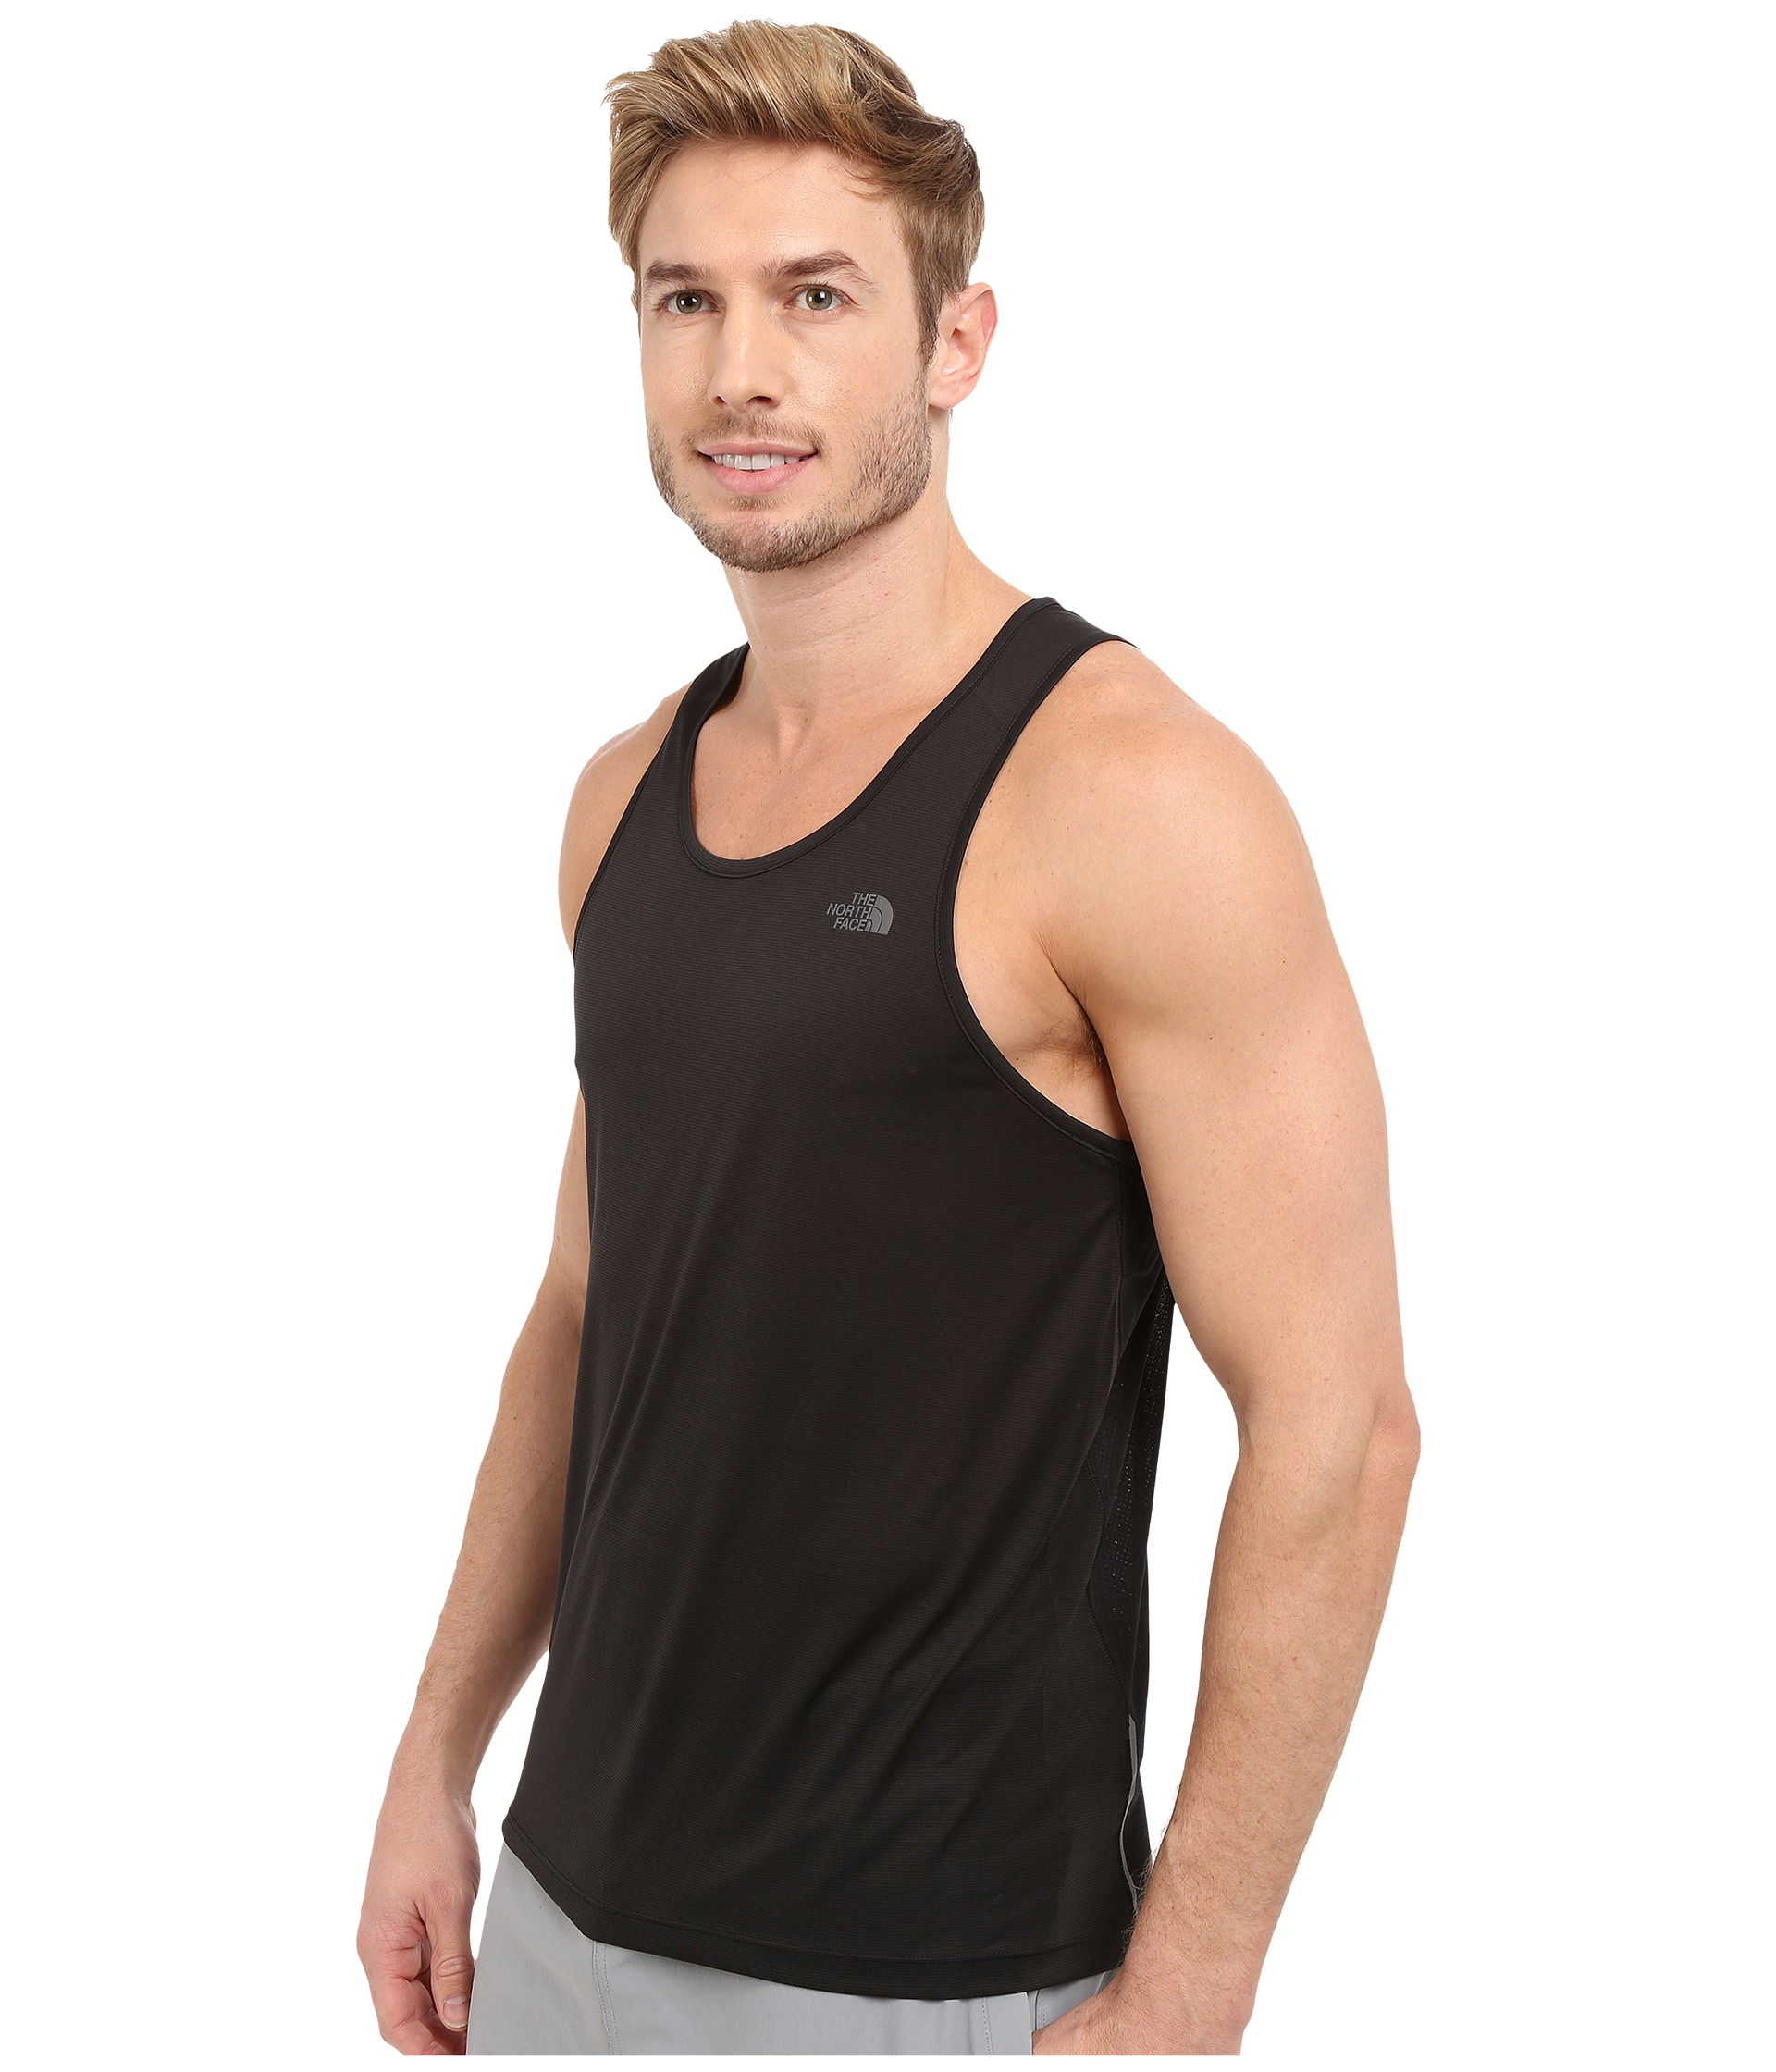 the north face tank top mens